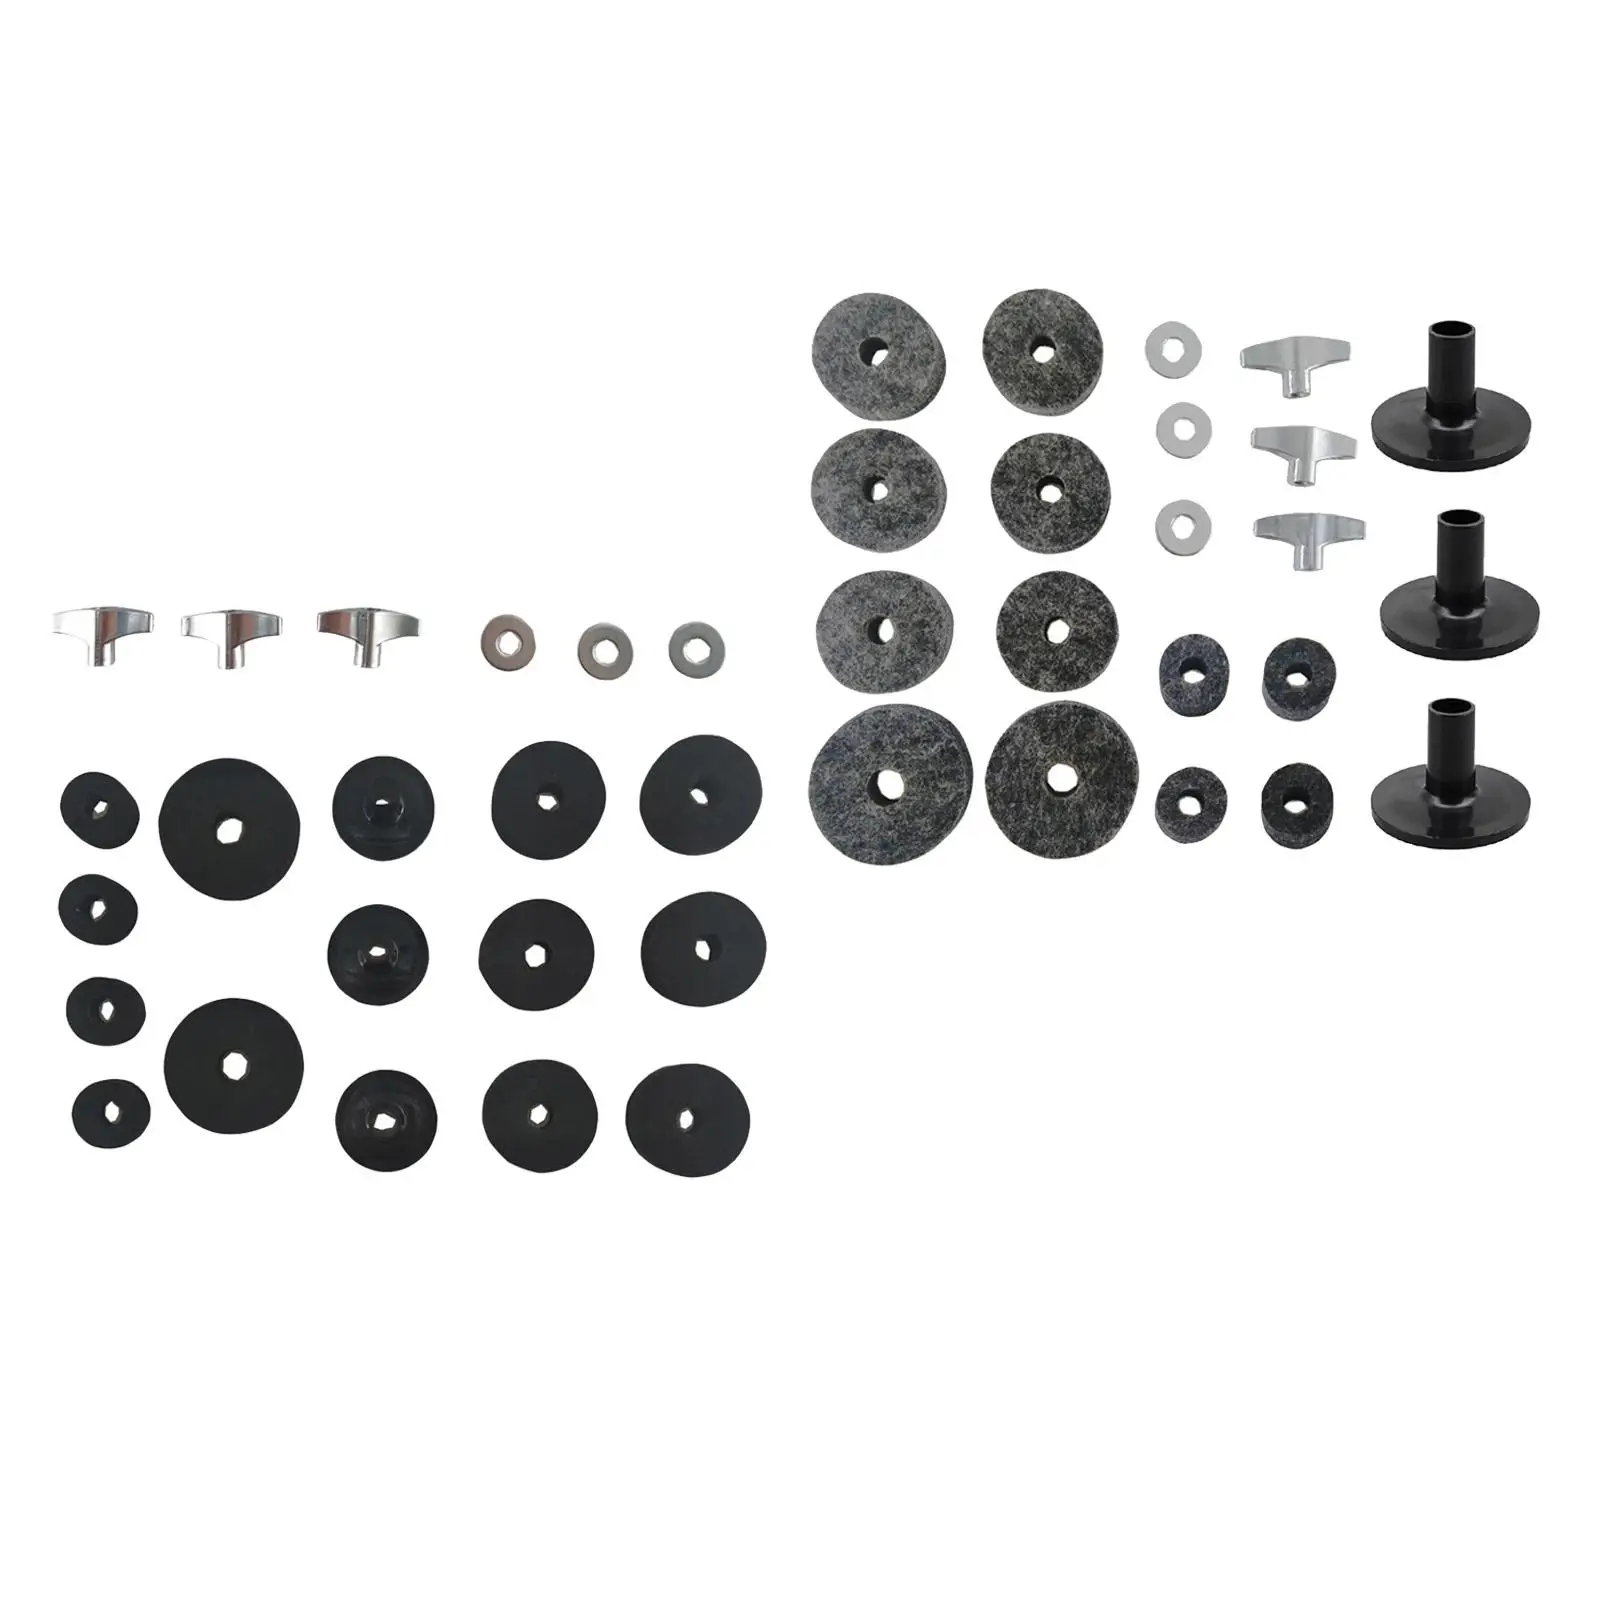 21x Drum Sets Replacement Cymbal Felts Washers Replacement Accessories Drum Replacement Parts